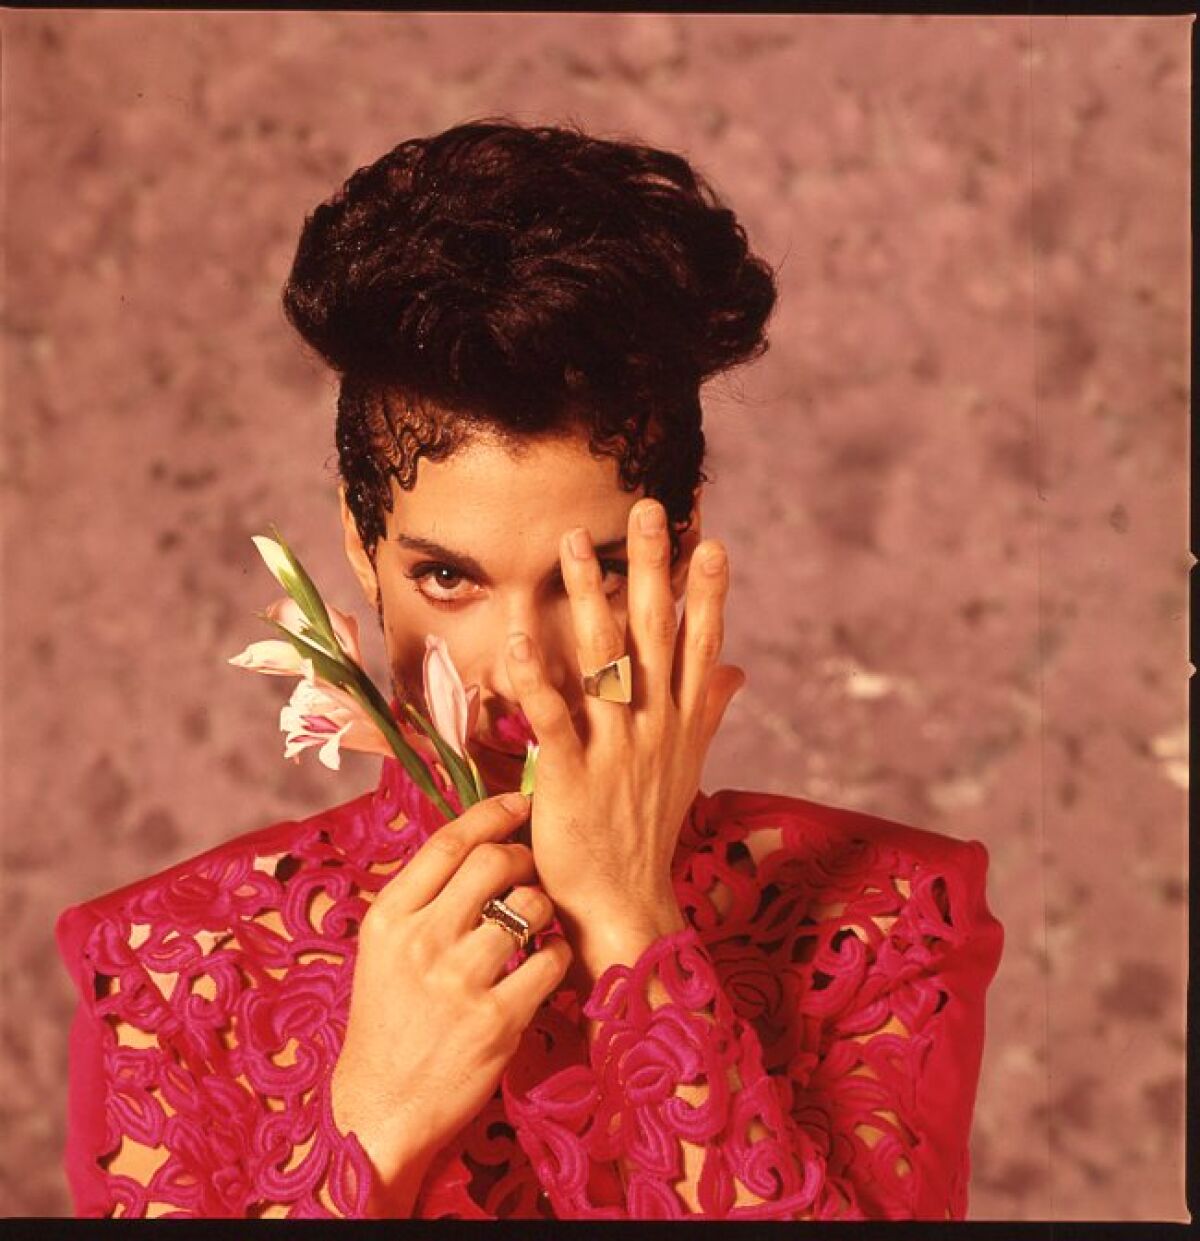 Prince holds a flower